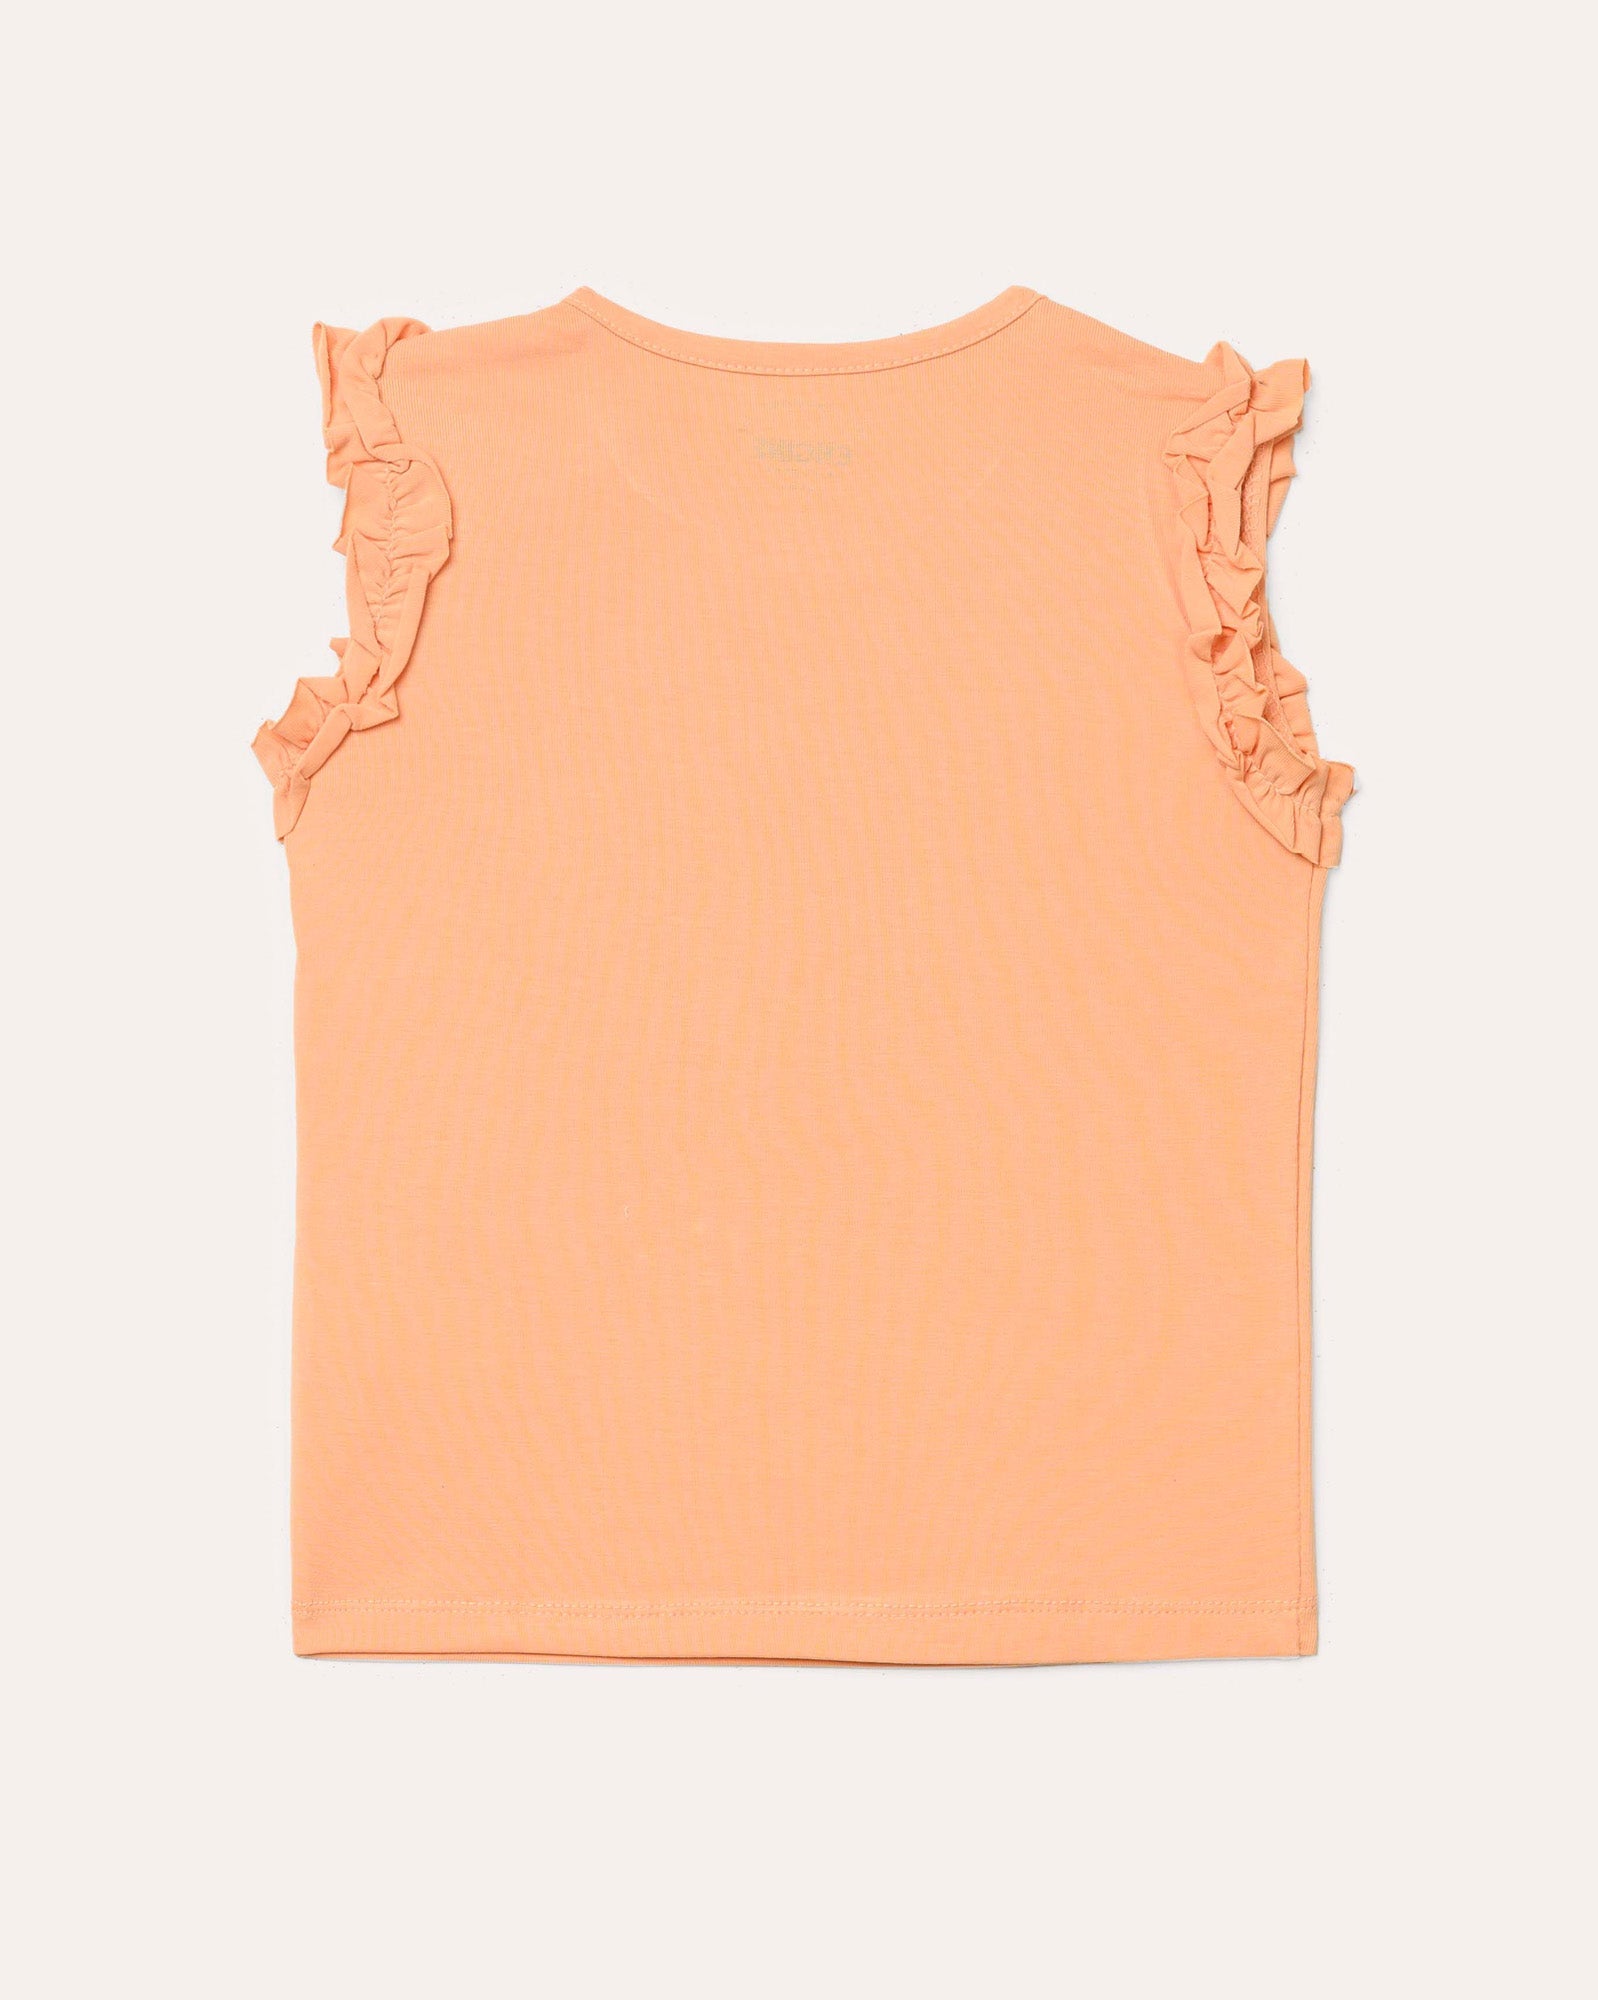 Graphic Tee  With Frill Detail Around Armhole For GIRLS - ENGINE